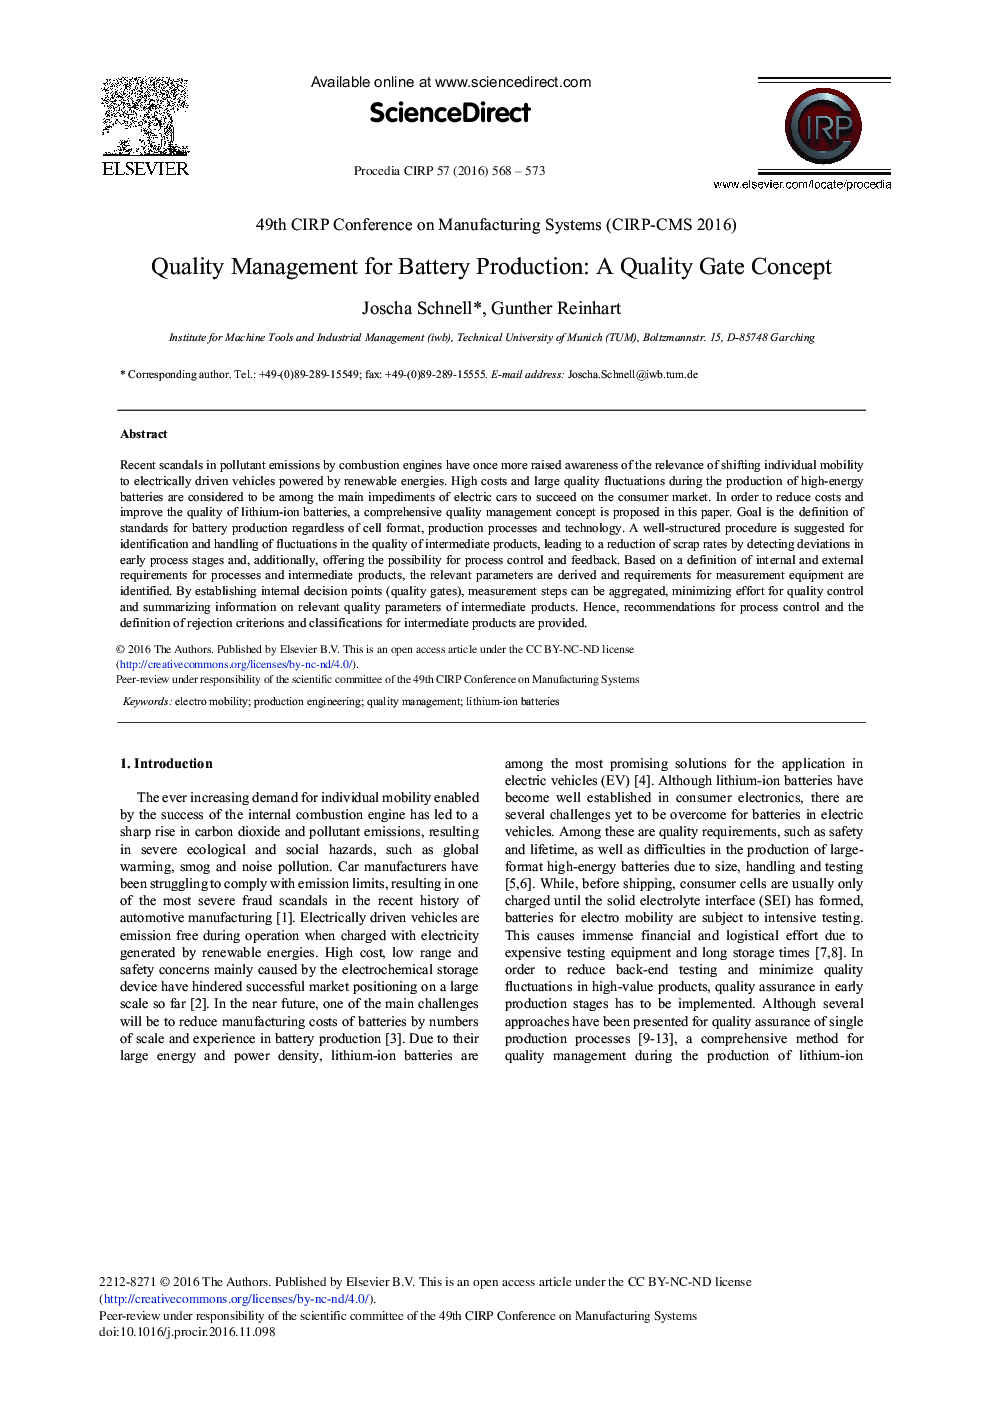 Quality Management for Battery Production: A Quality Gate Concept